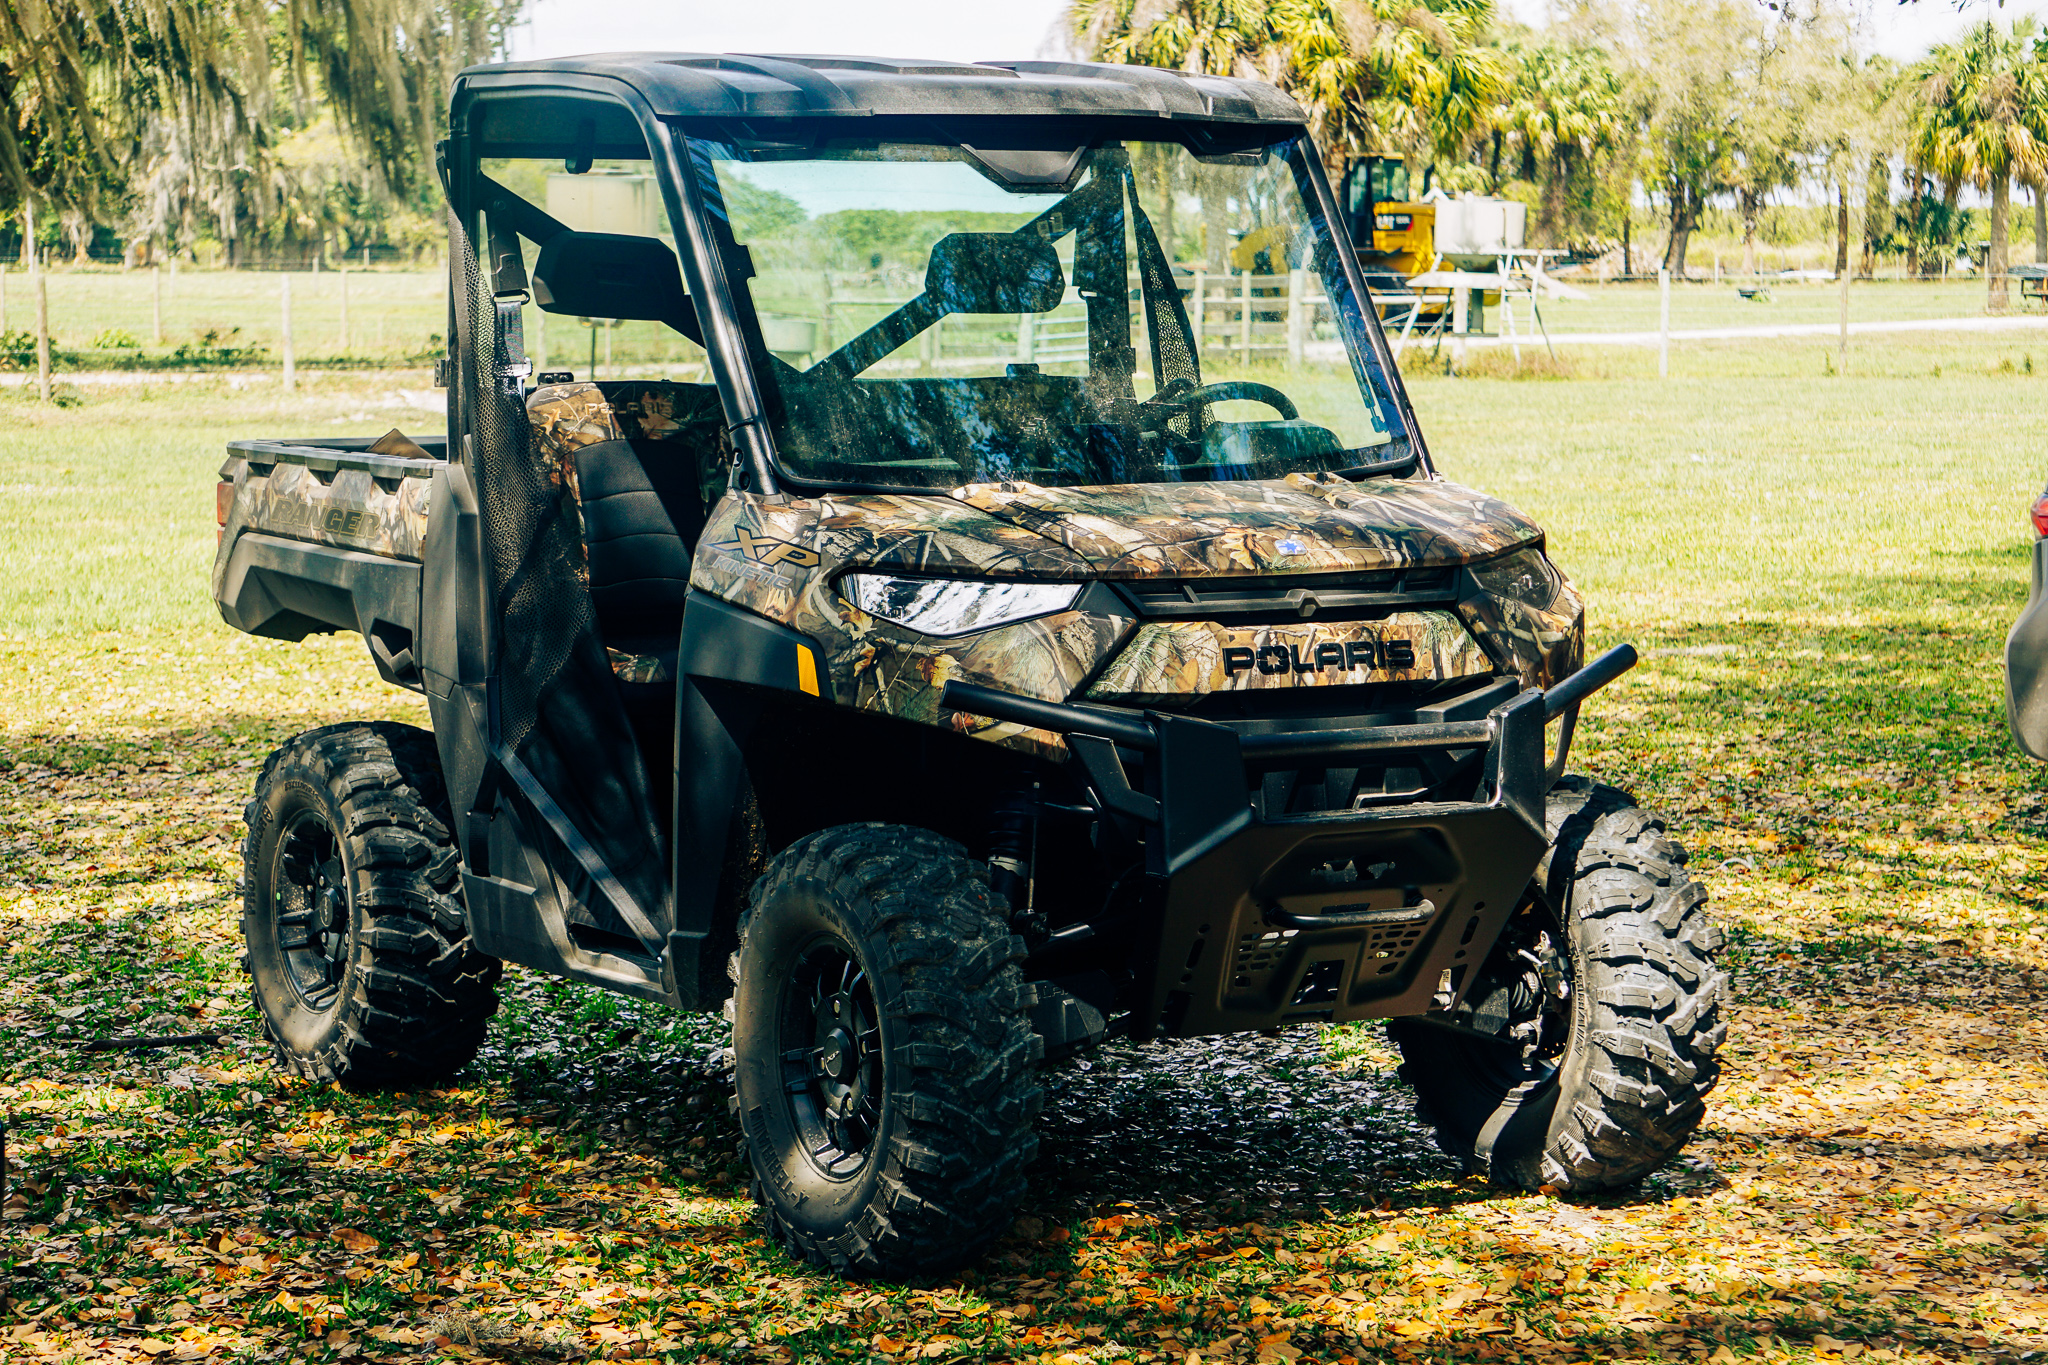 The Ranger Kinetic Is the Electric UTV Want | Outdoor Life